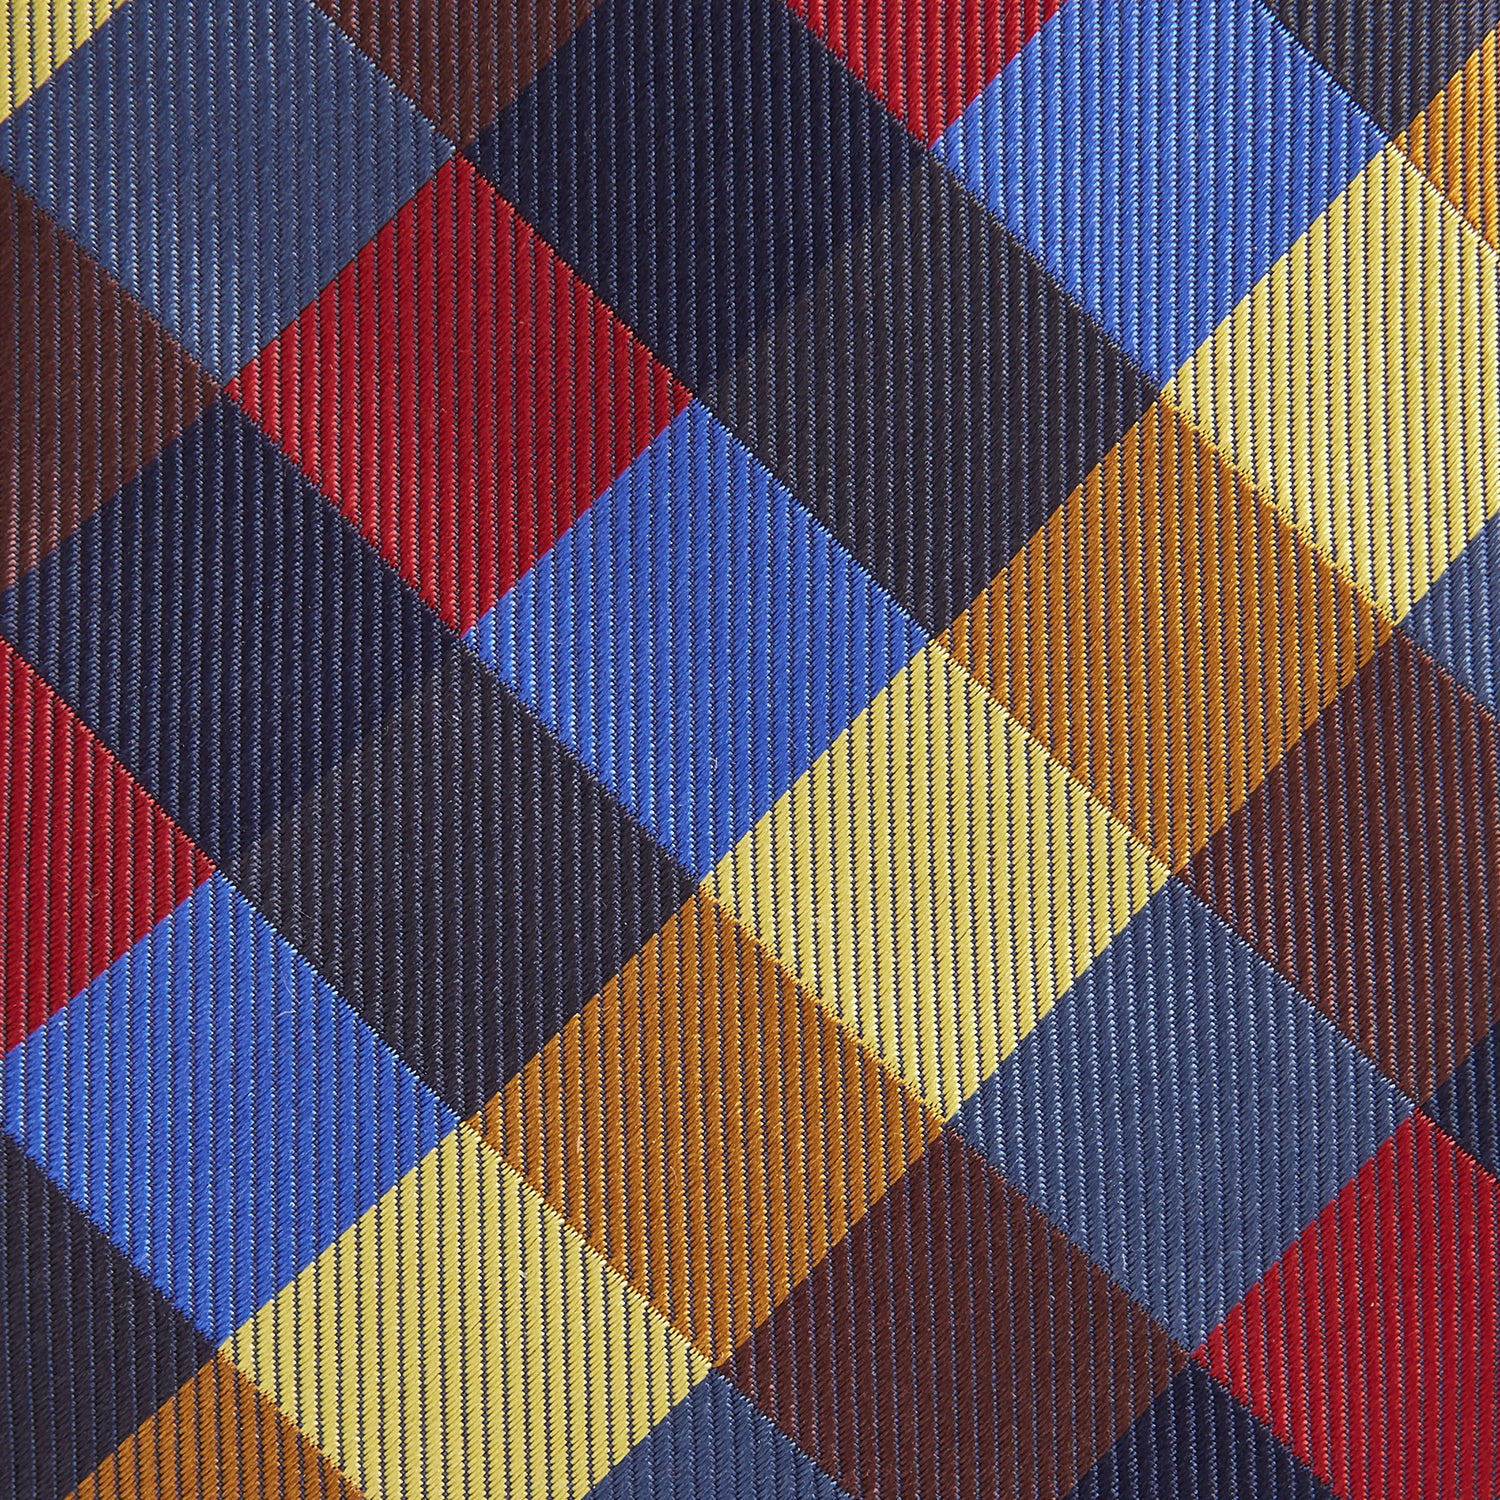 Blue, Red and Yellow Checker Silk Tie